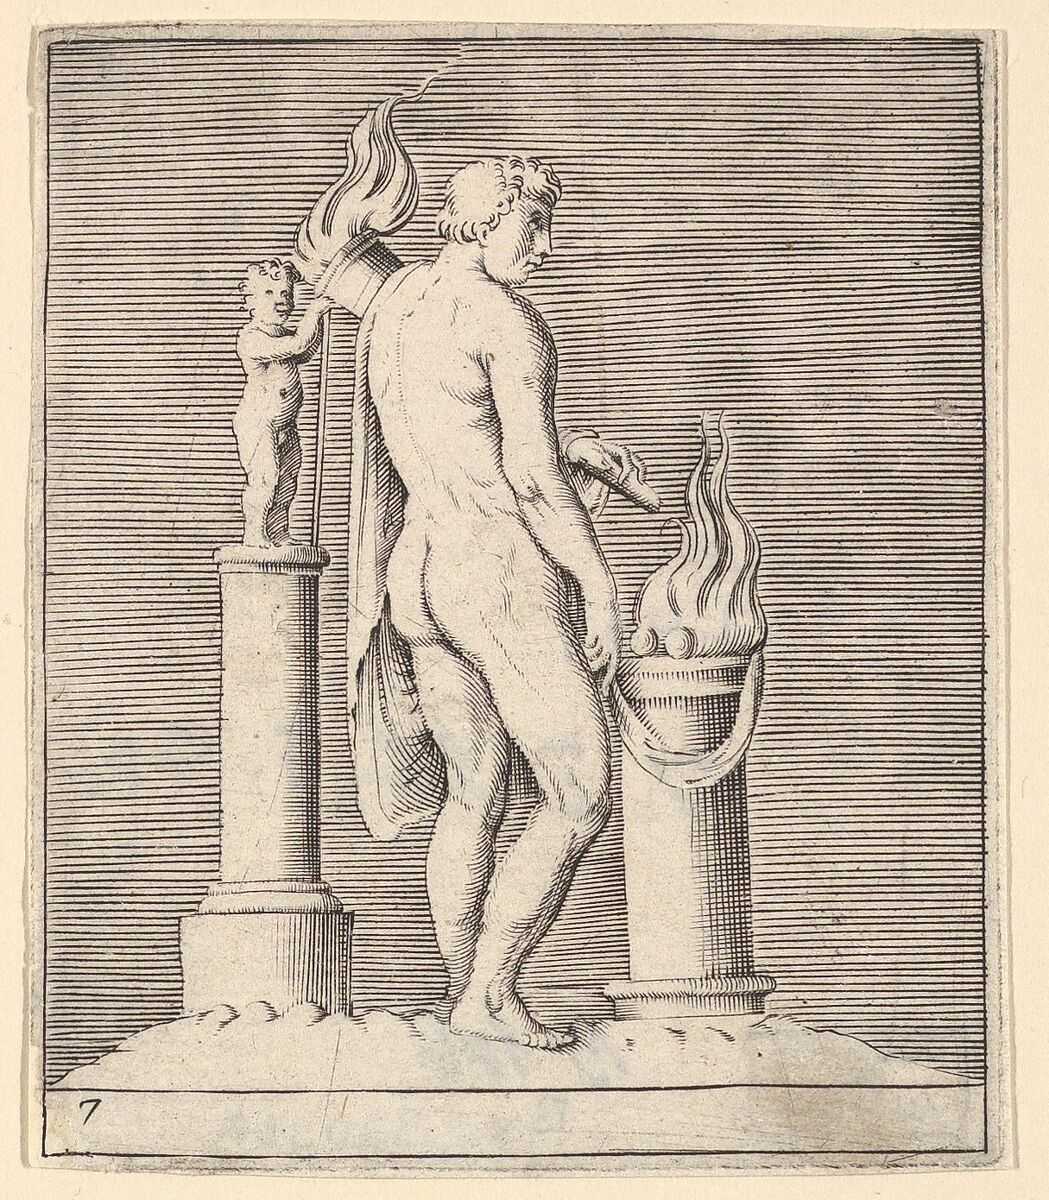 Man with Torch between Flaming Altar and Statuette, from "Ex Antiquis Cameorum et Gemmae Delineata/ Liber Secundus/et ab Enea Vico Parmen Incis", Engraved by Anonymous, Italian, 16th century, Engraving; third state 